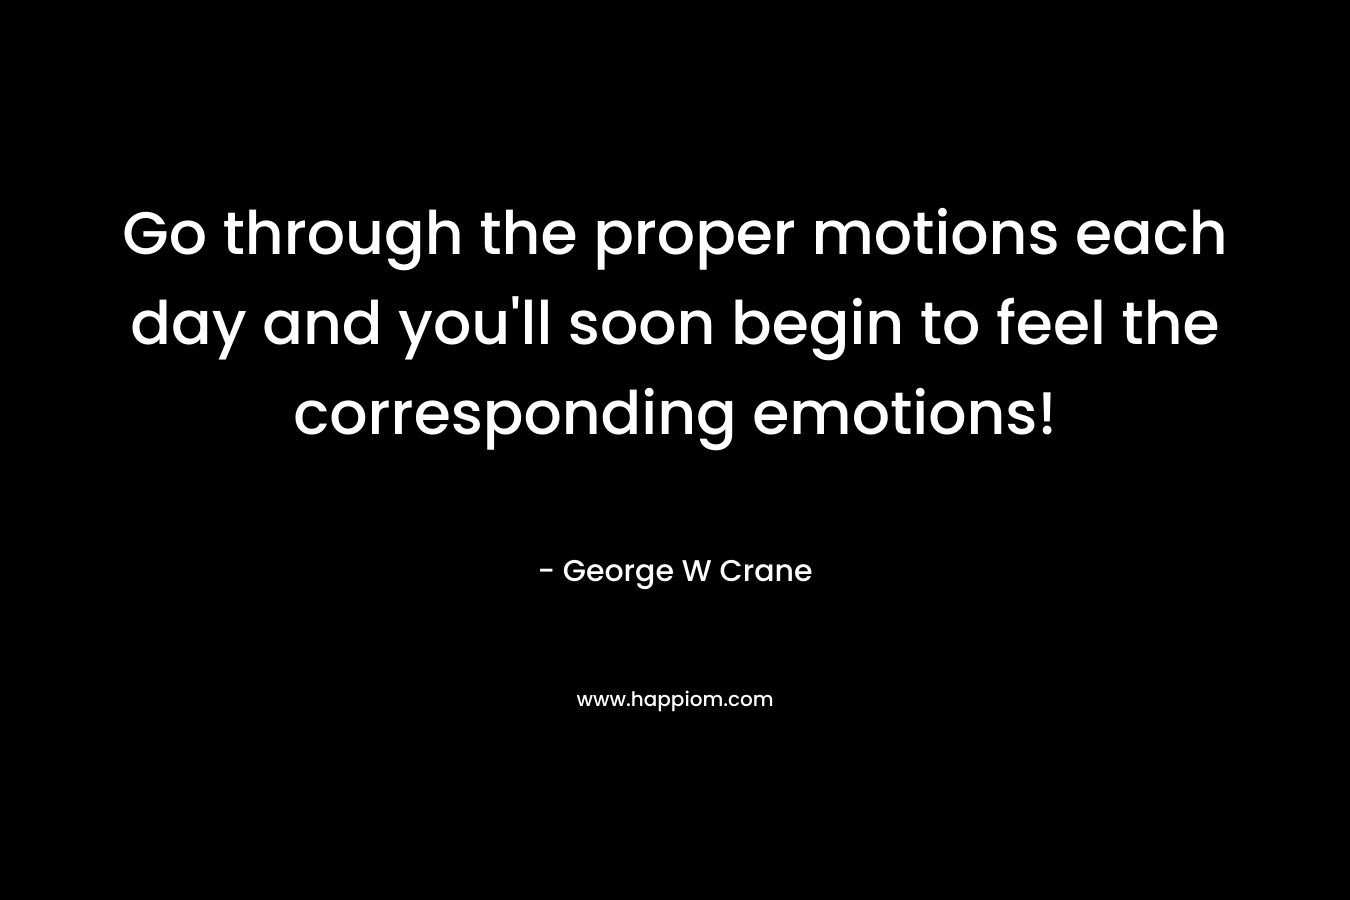 Go through the proper motions each day and you’ll soon begin to feel the corresponding emotions! – George W Crane